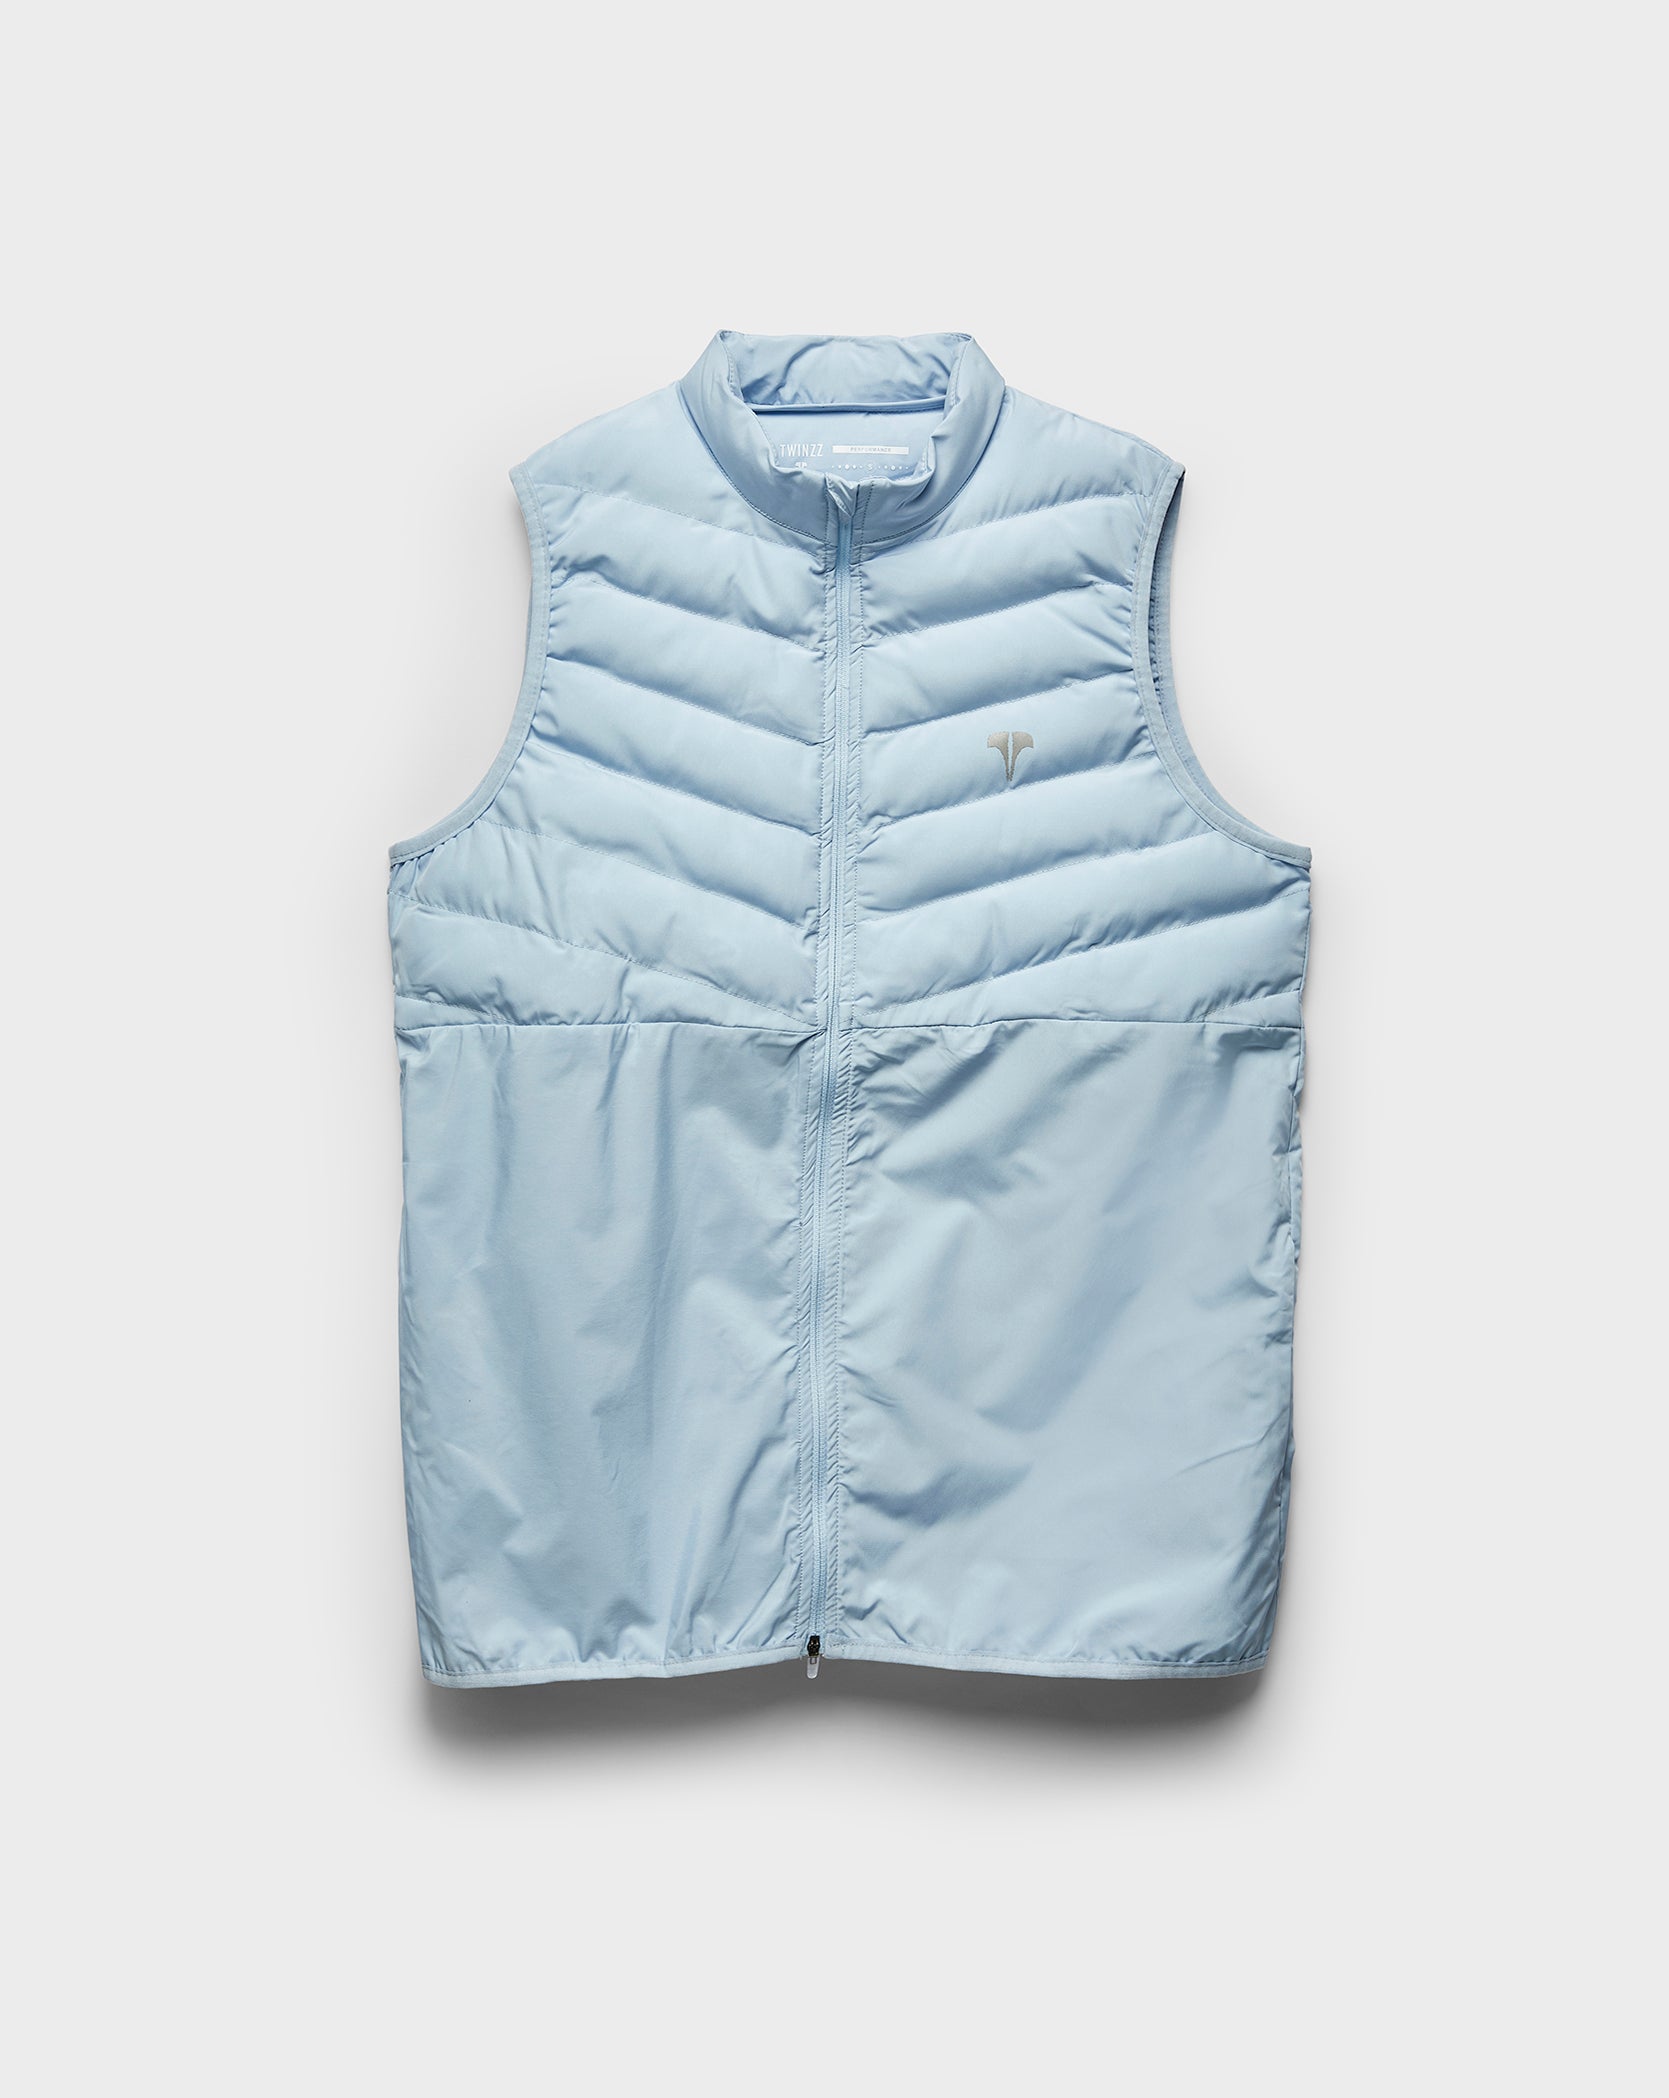 Twinzz active sky blue gilet front